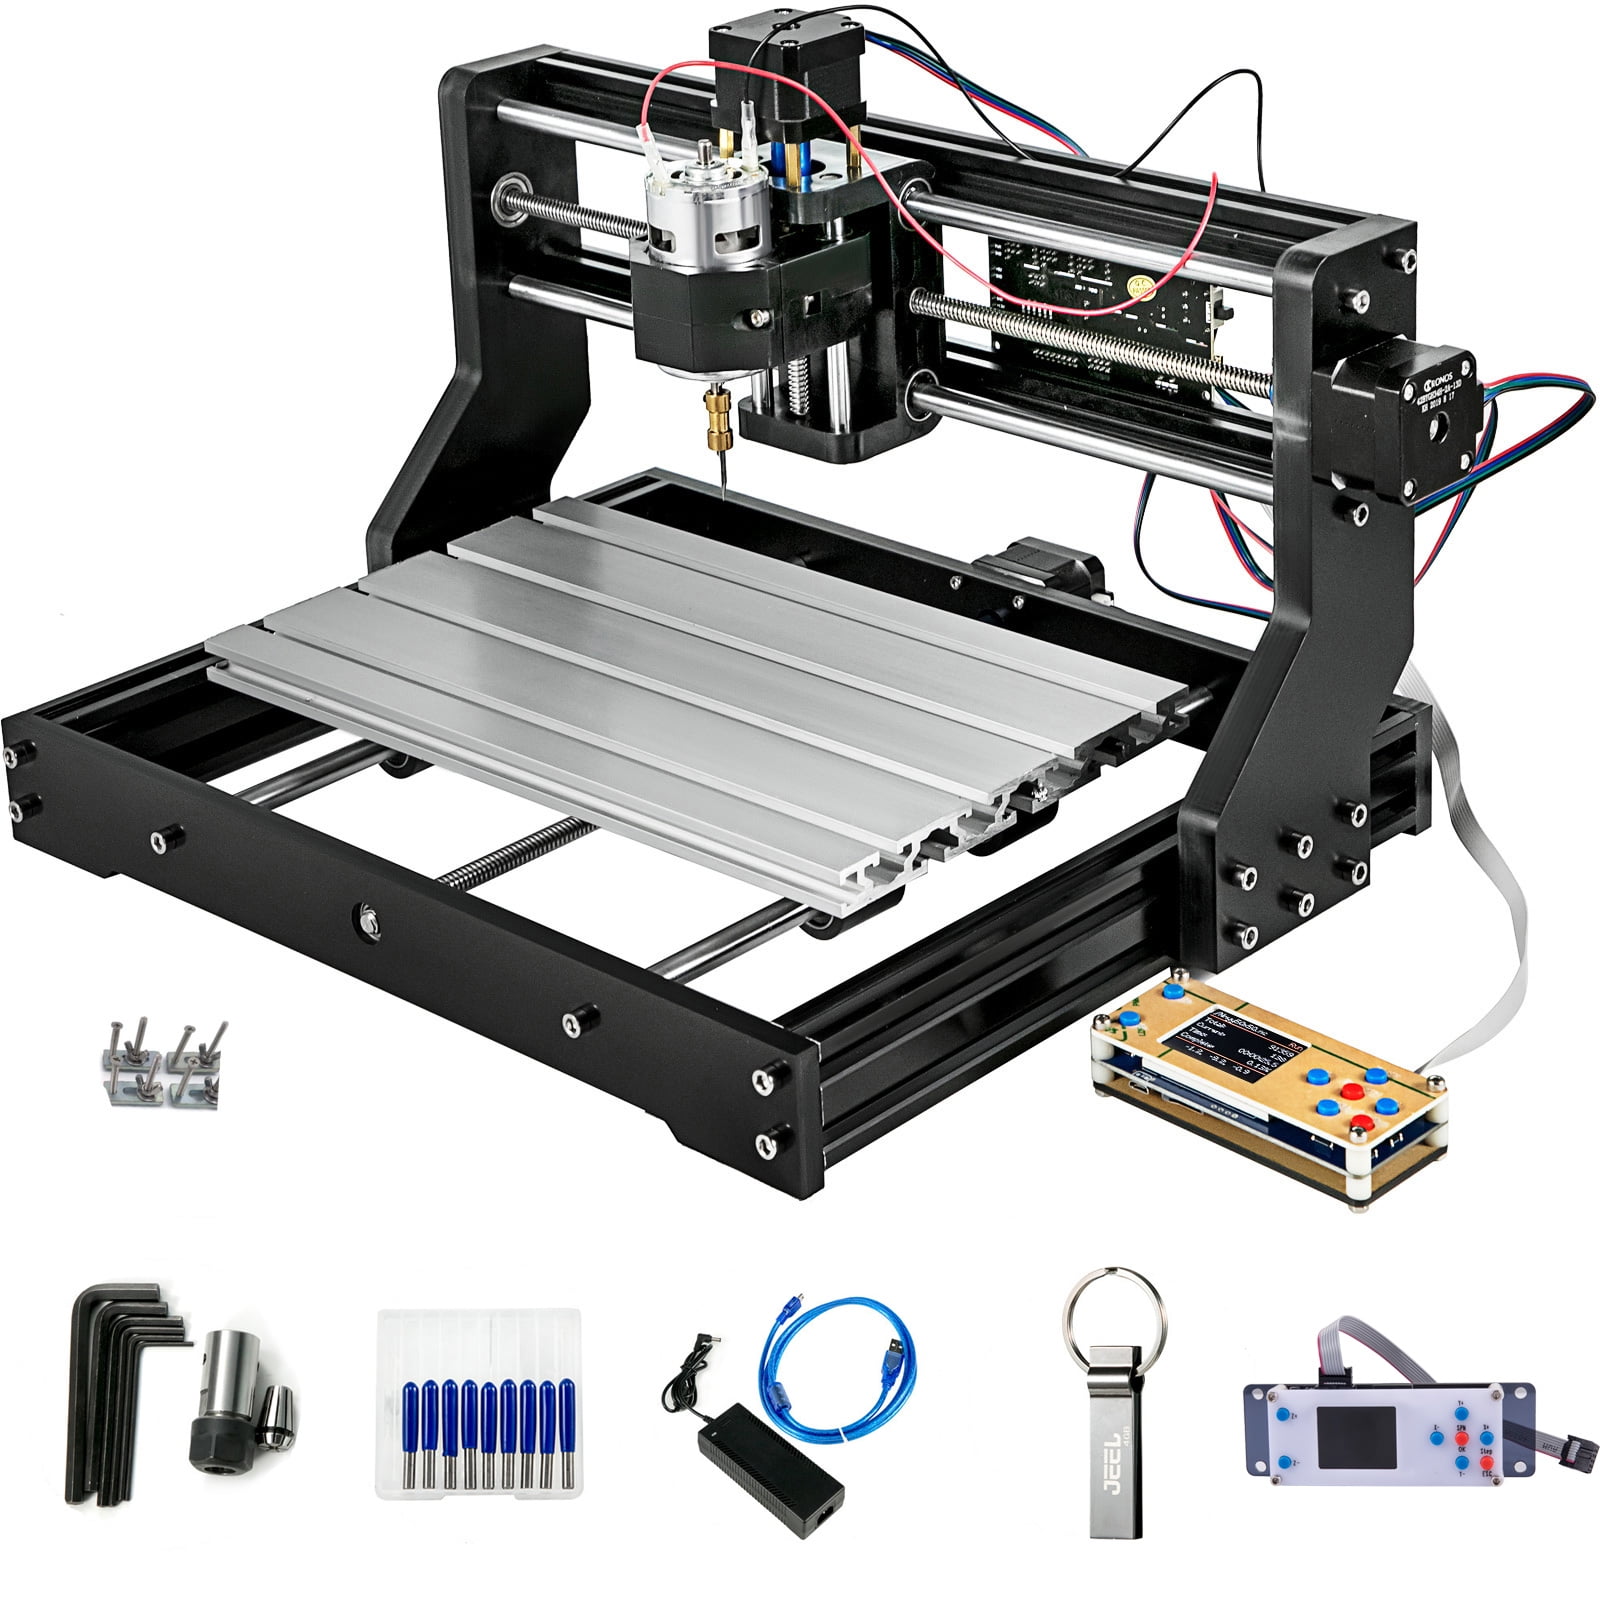 VEVOR CNC 3018-PRO 3 Axis CNC Router Kit GRBL Control with Offline